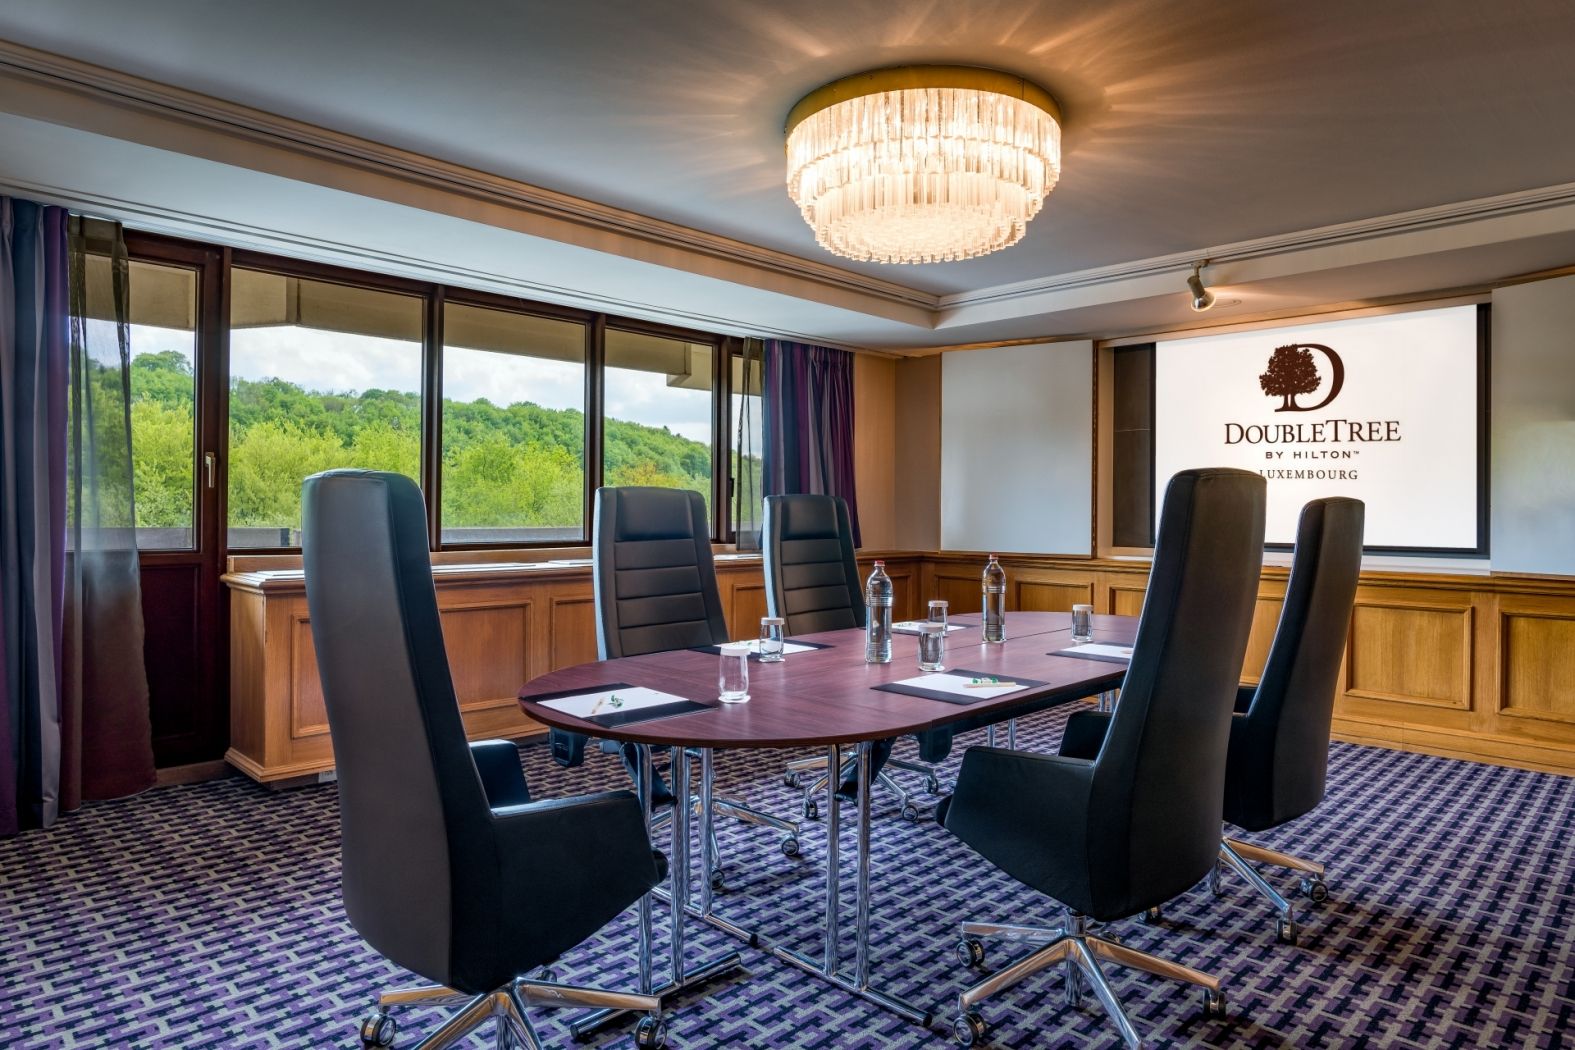 DoubleTree by Hilton Hotel Luxembourg Meeting Room Autriche